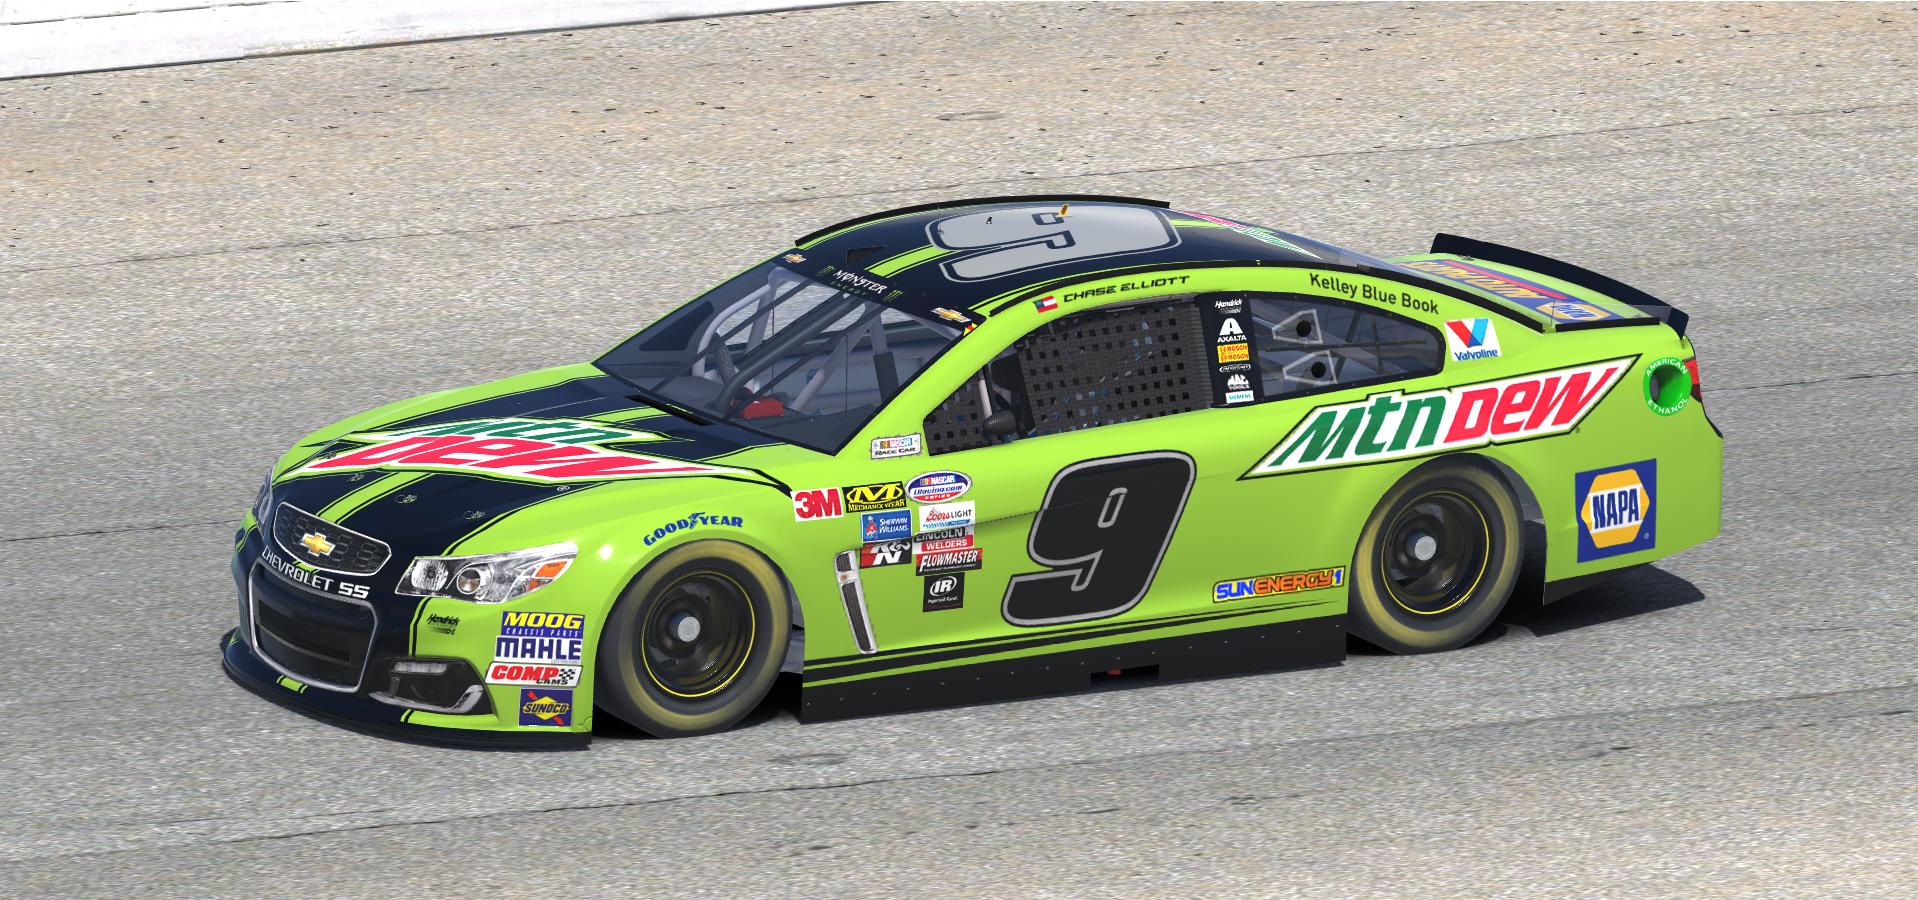 2018 Chase Elliott Mountain Dew Chevy by Doug DeNise - Trading Paints.